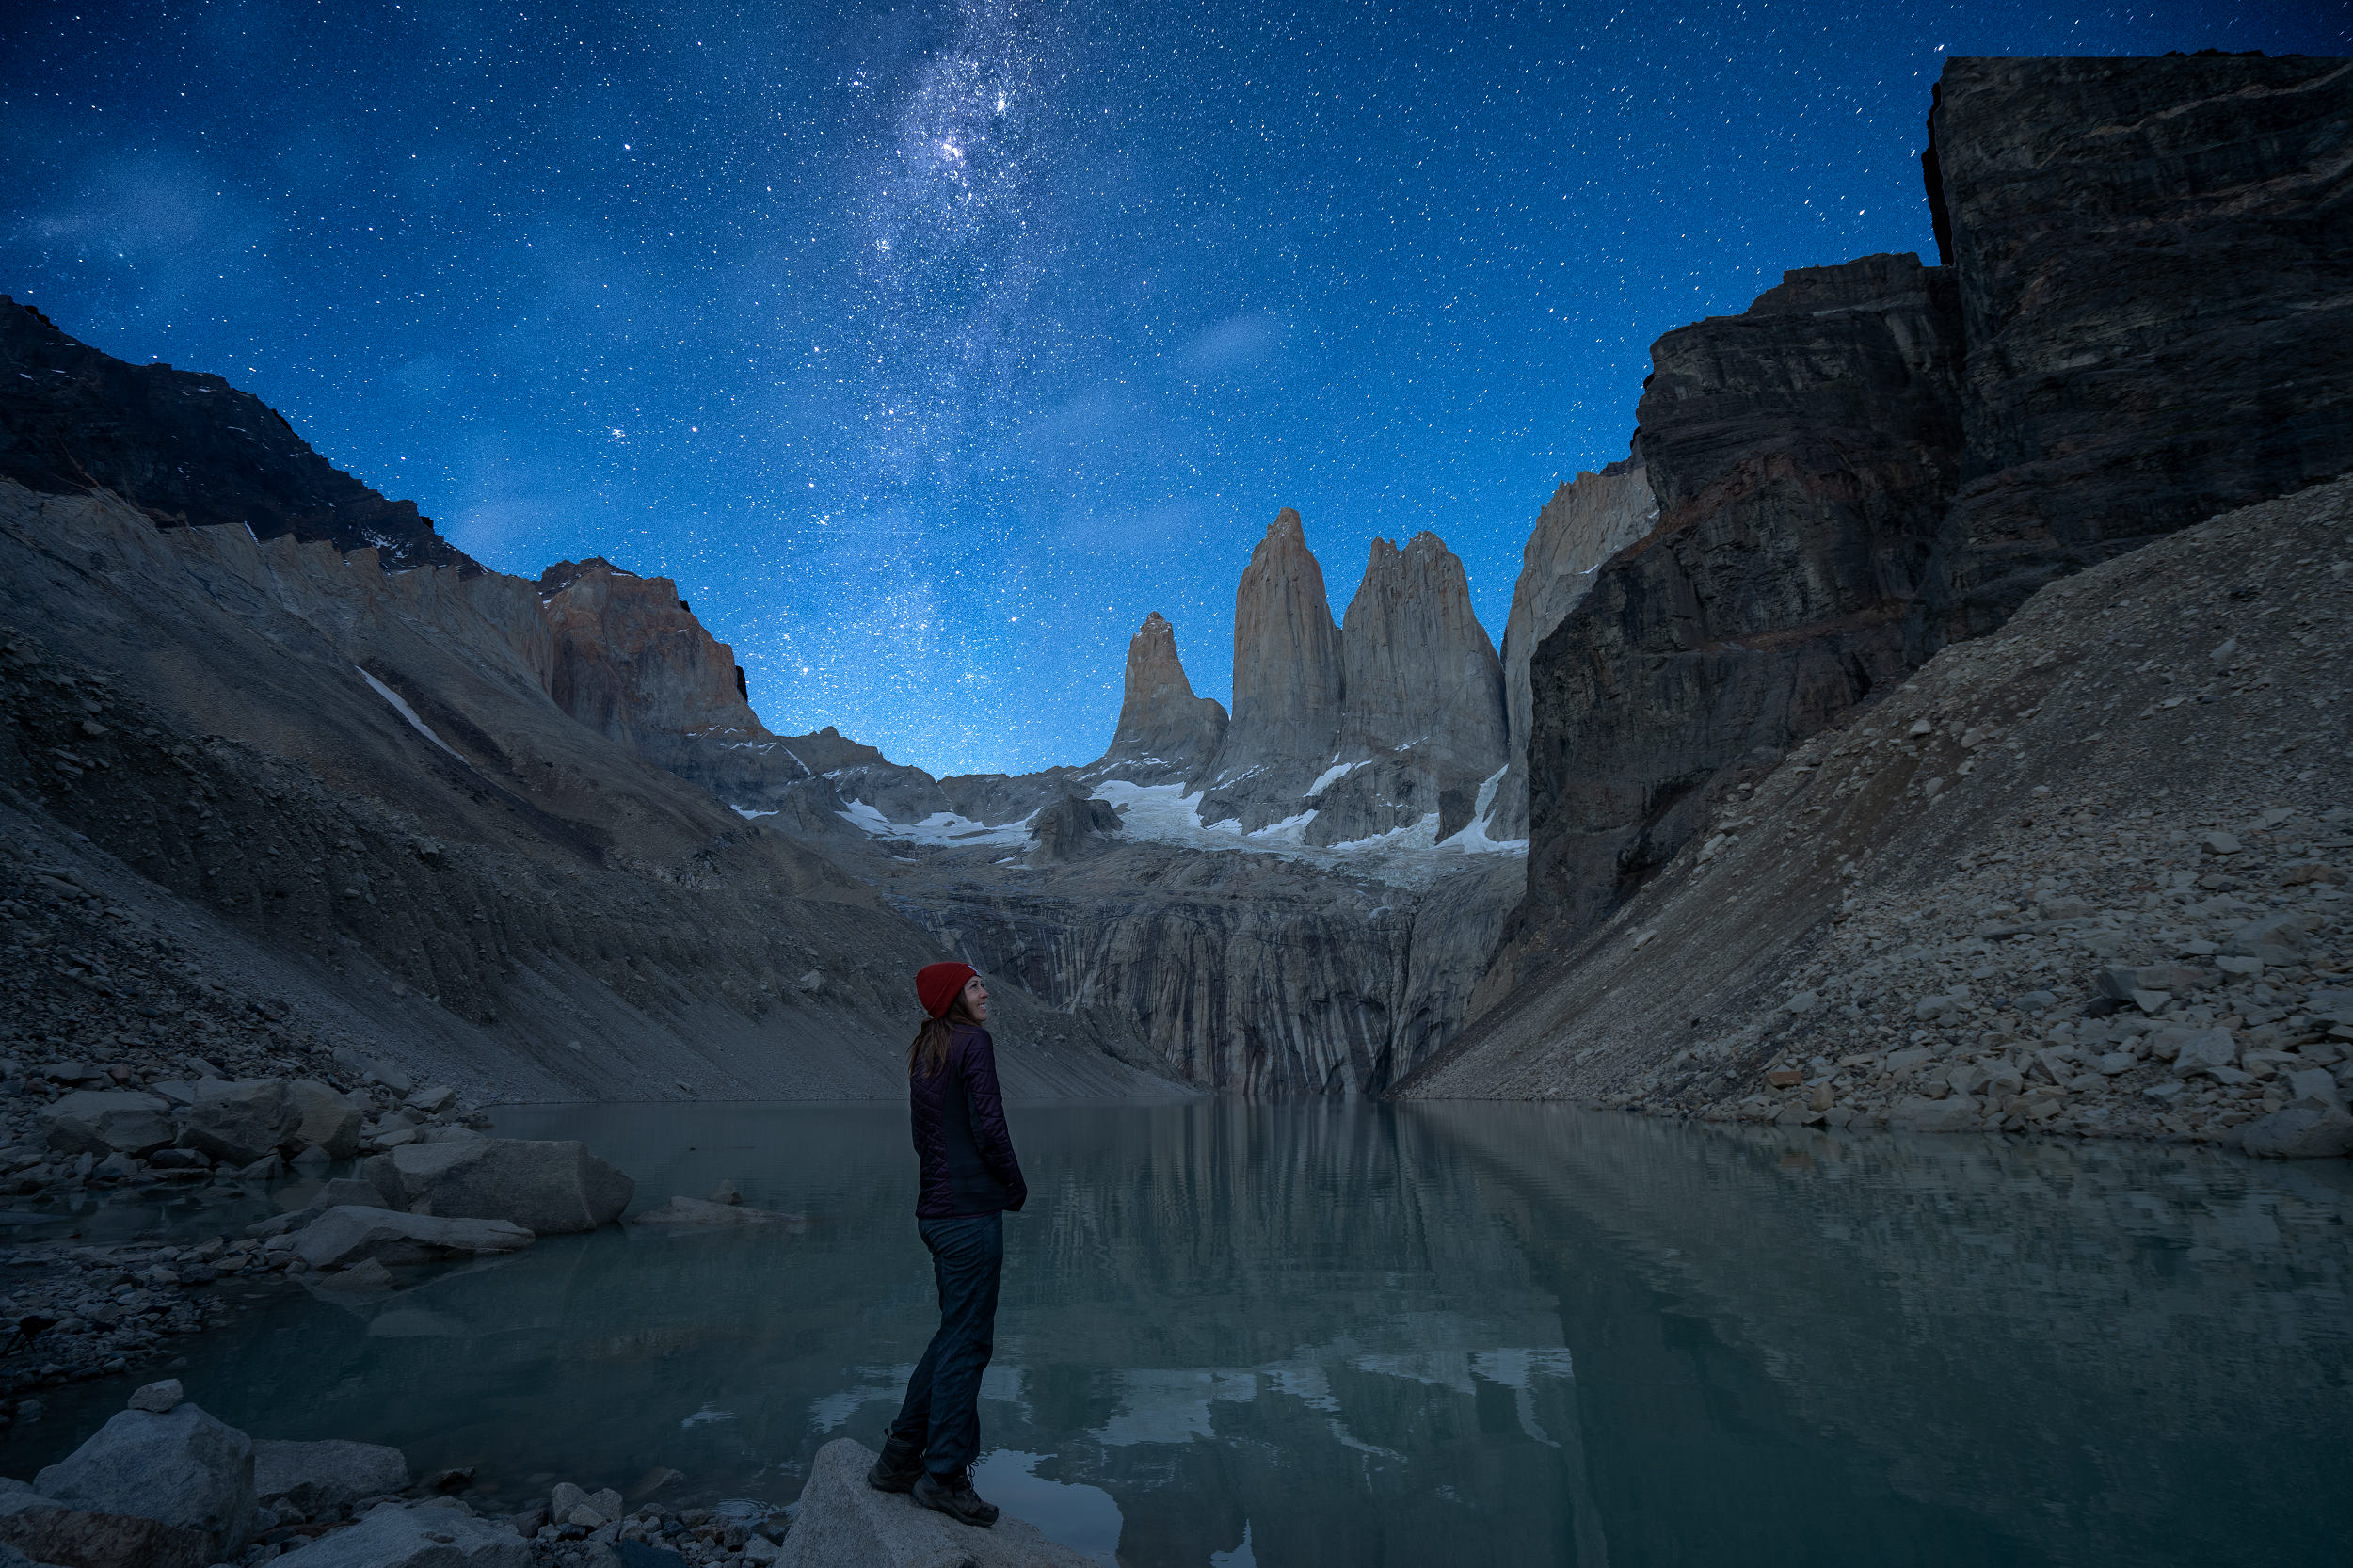 A woman stands on the edge of a blue-green lake surrounded by mountain peaks. The stars can be seen clearly in the night sky.